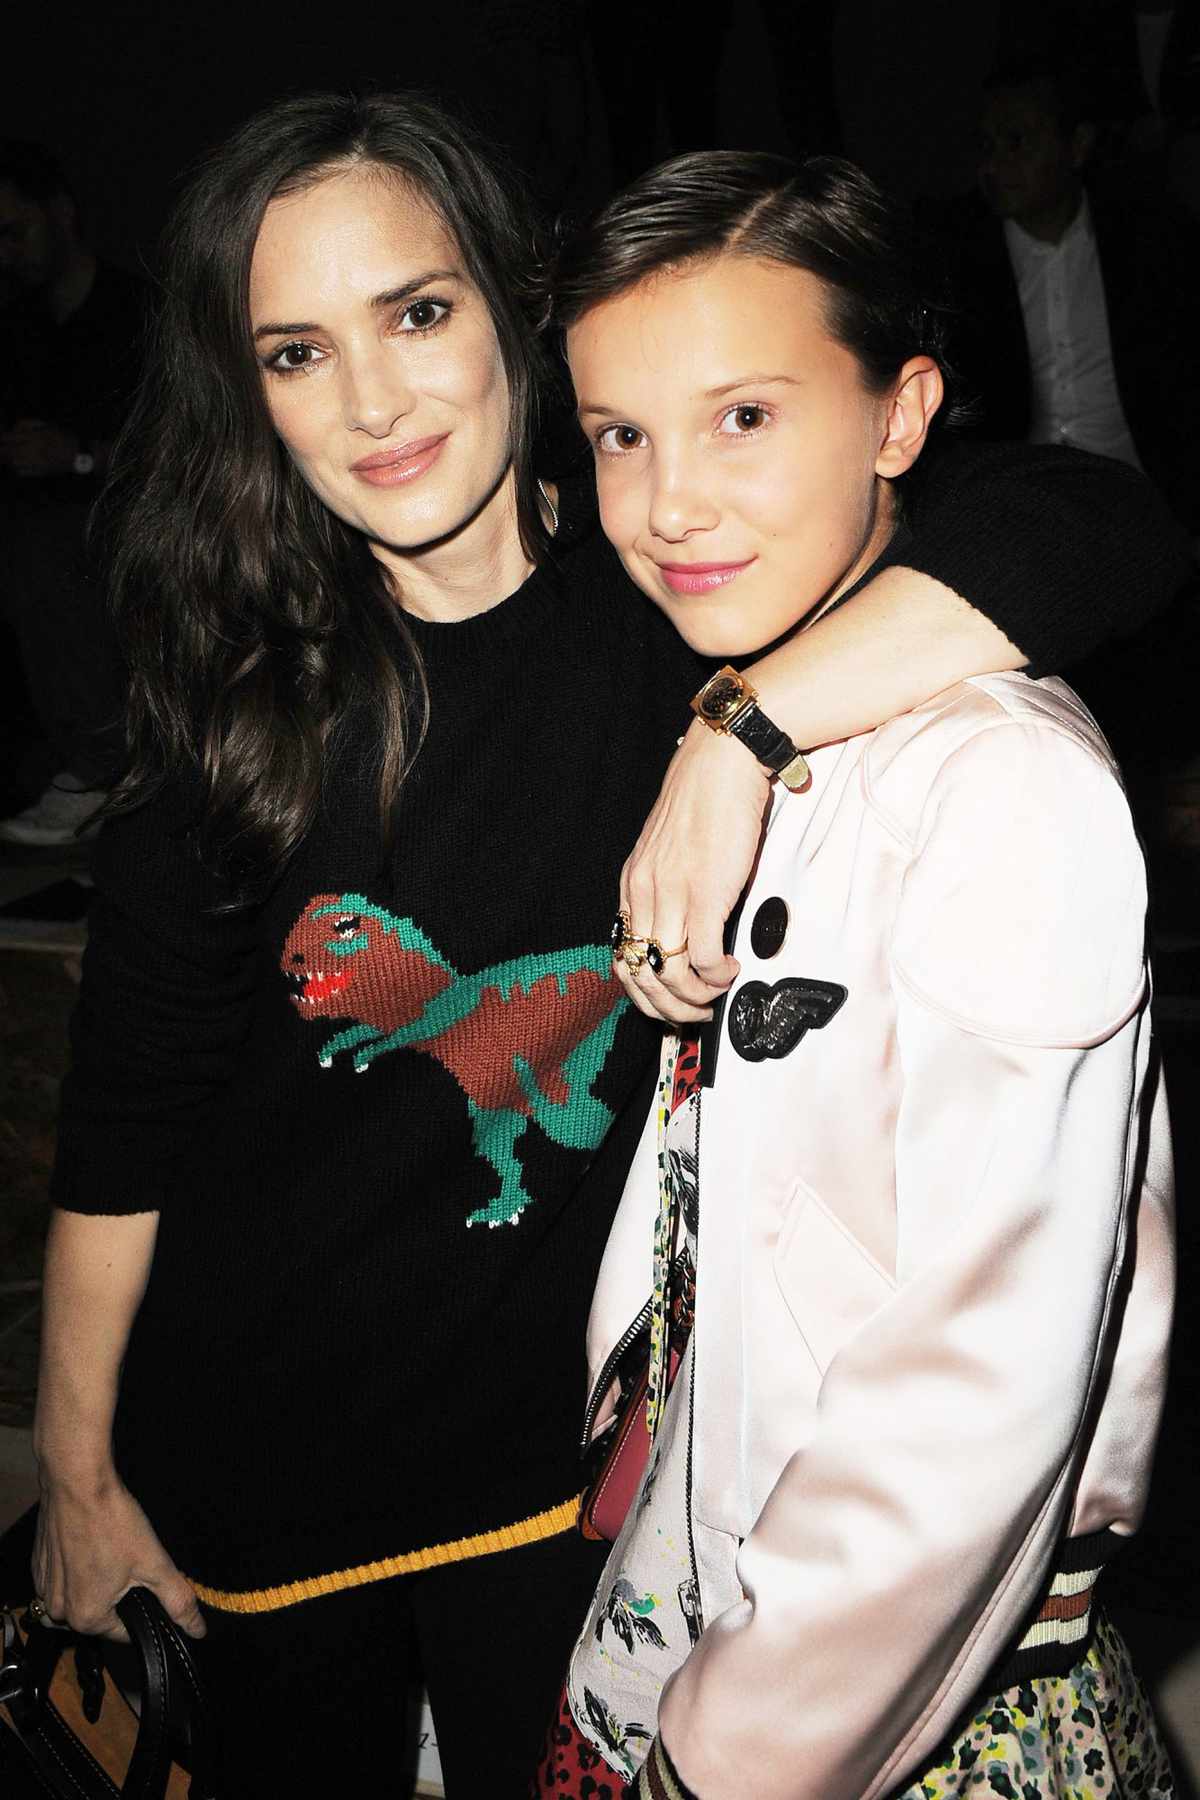 Winona Ryder and Millie Bobby Brown